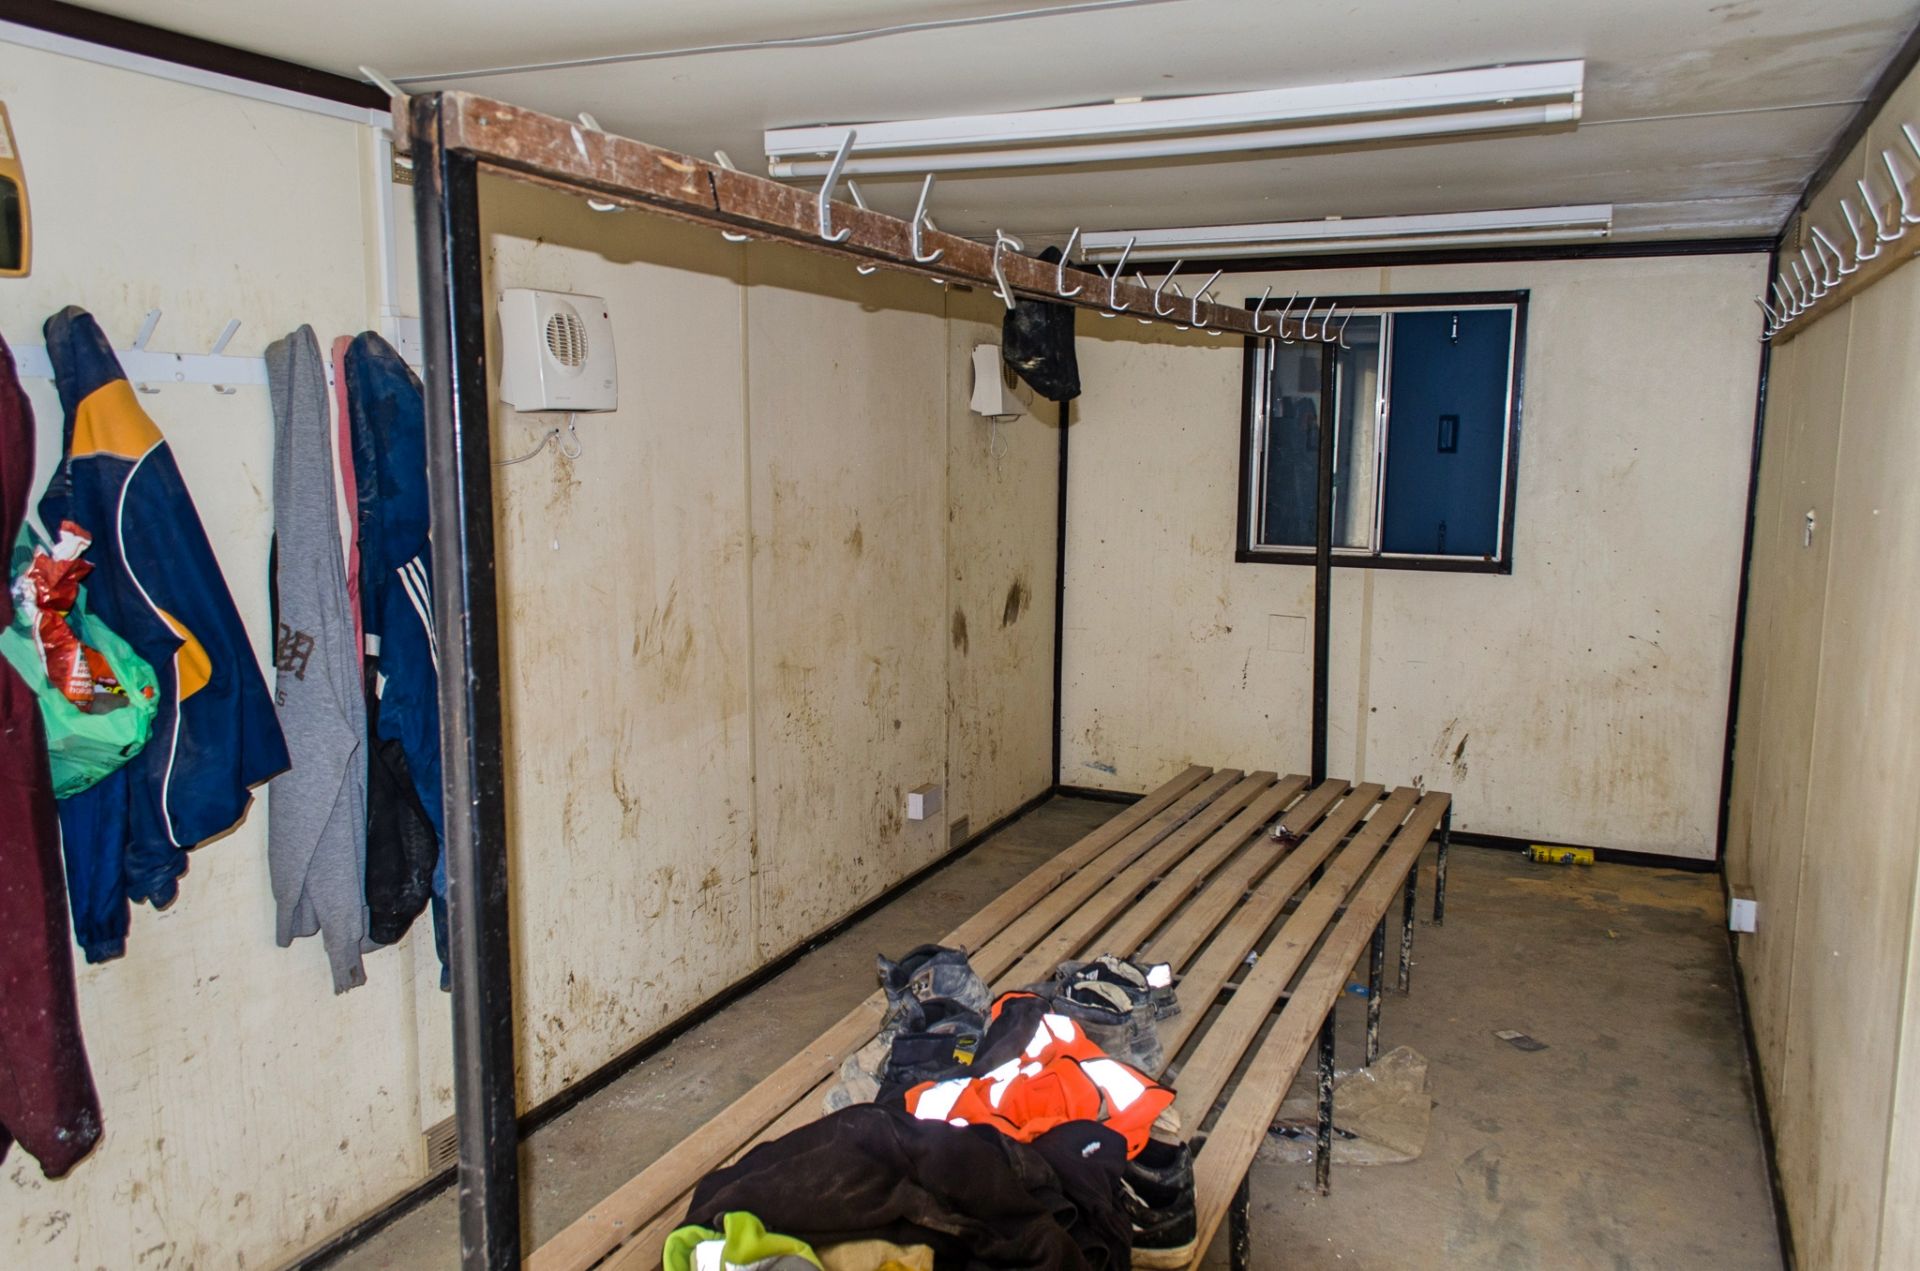 21 ft x 9 ft steel anti vandal changing room site unit A572247 ** No keys but open ** - Image 5 of 6